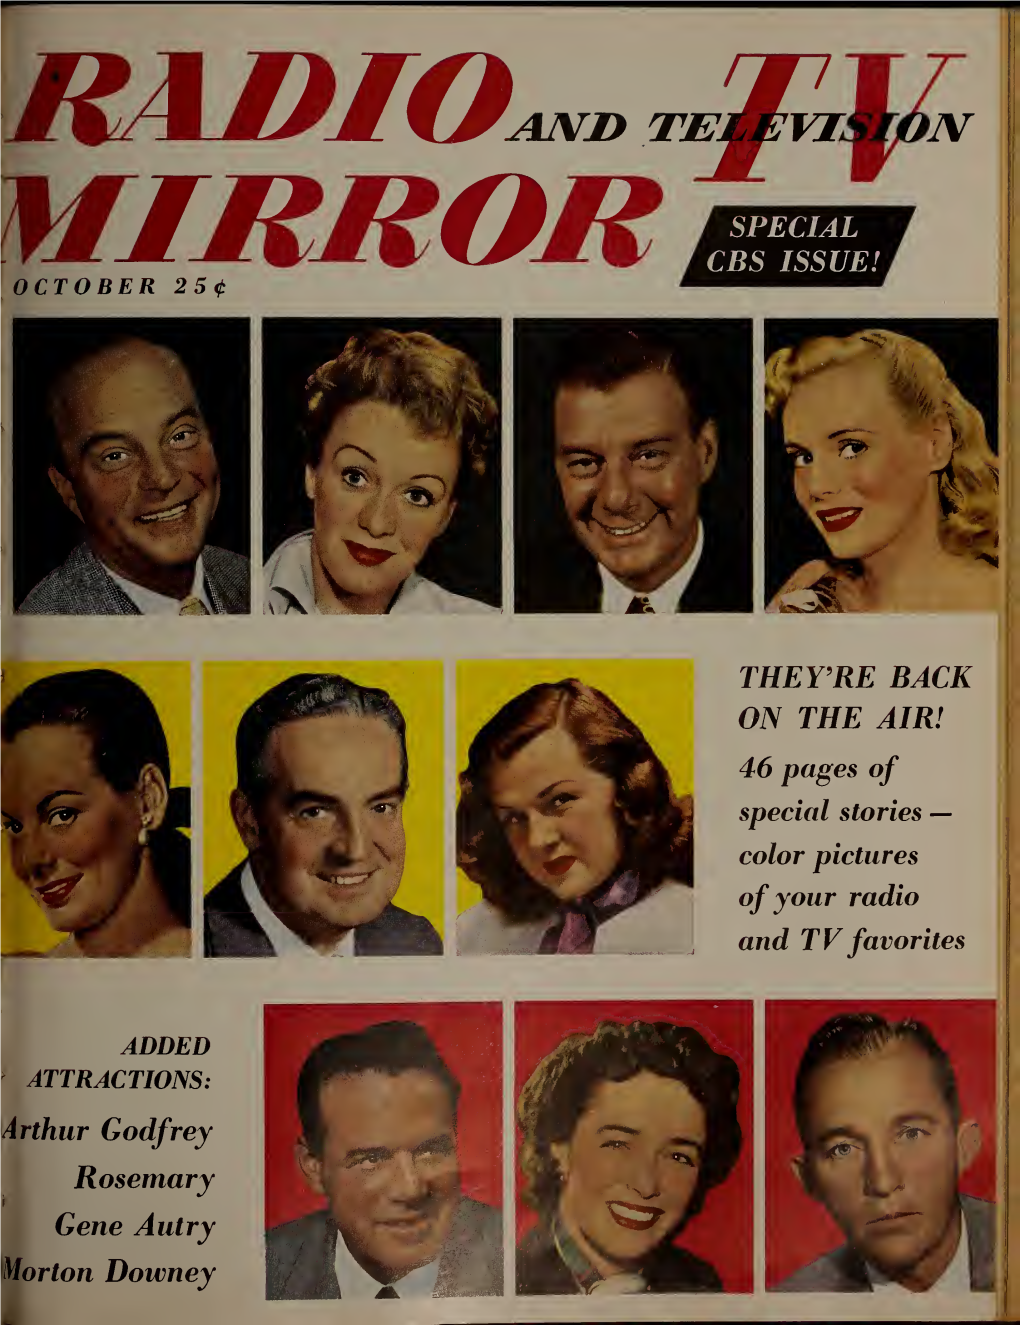 Radio and Television Mirror Again Salutes the Network's Excellent Fall Line-Up of Stars and Shows with This Second CBS Issue